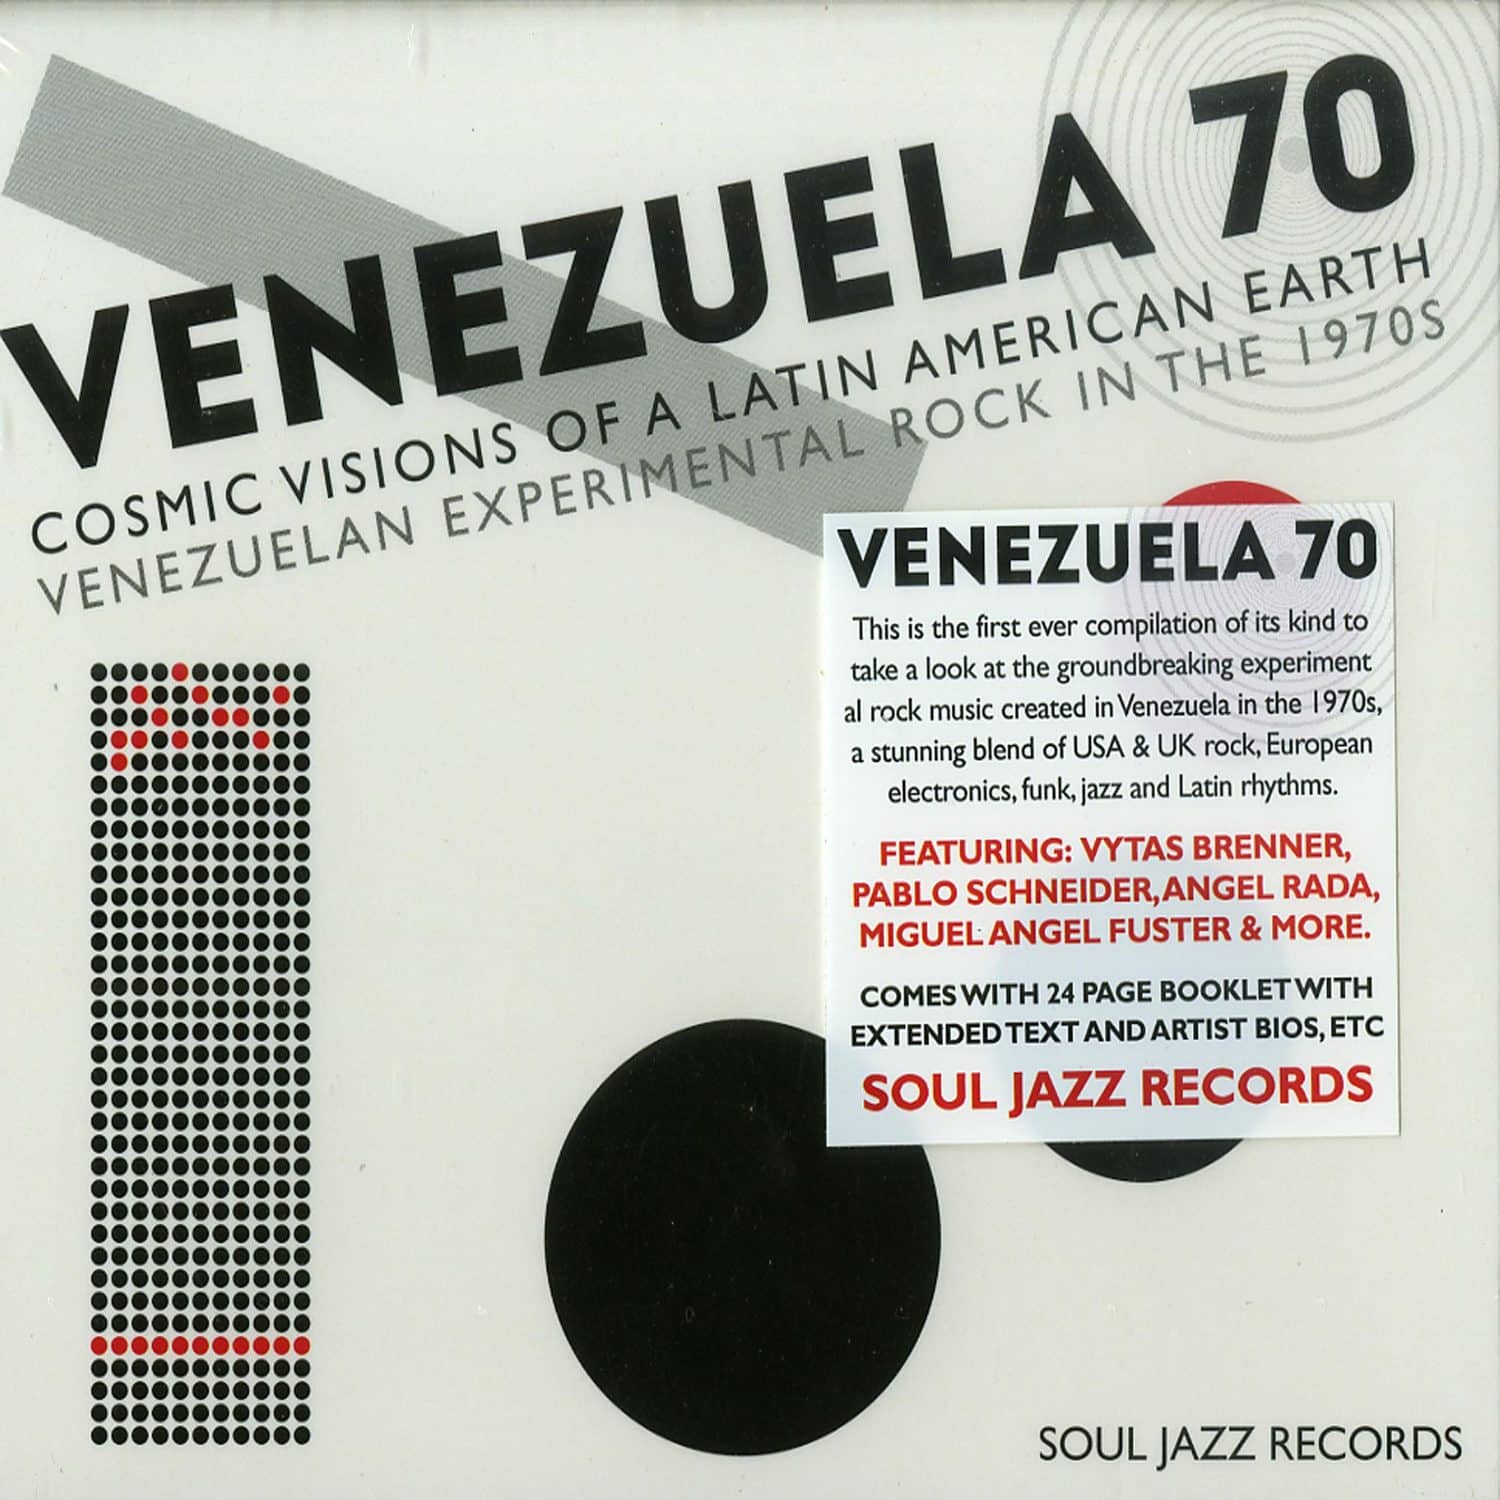 Various Artists - VENEZUELA 70: COSMIC VISIONS OF A LATIN AMERICAN EARTH 